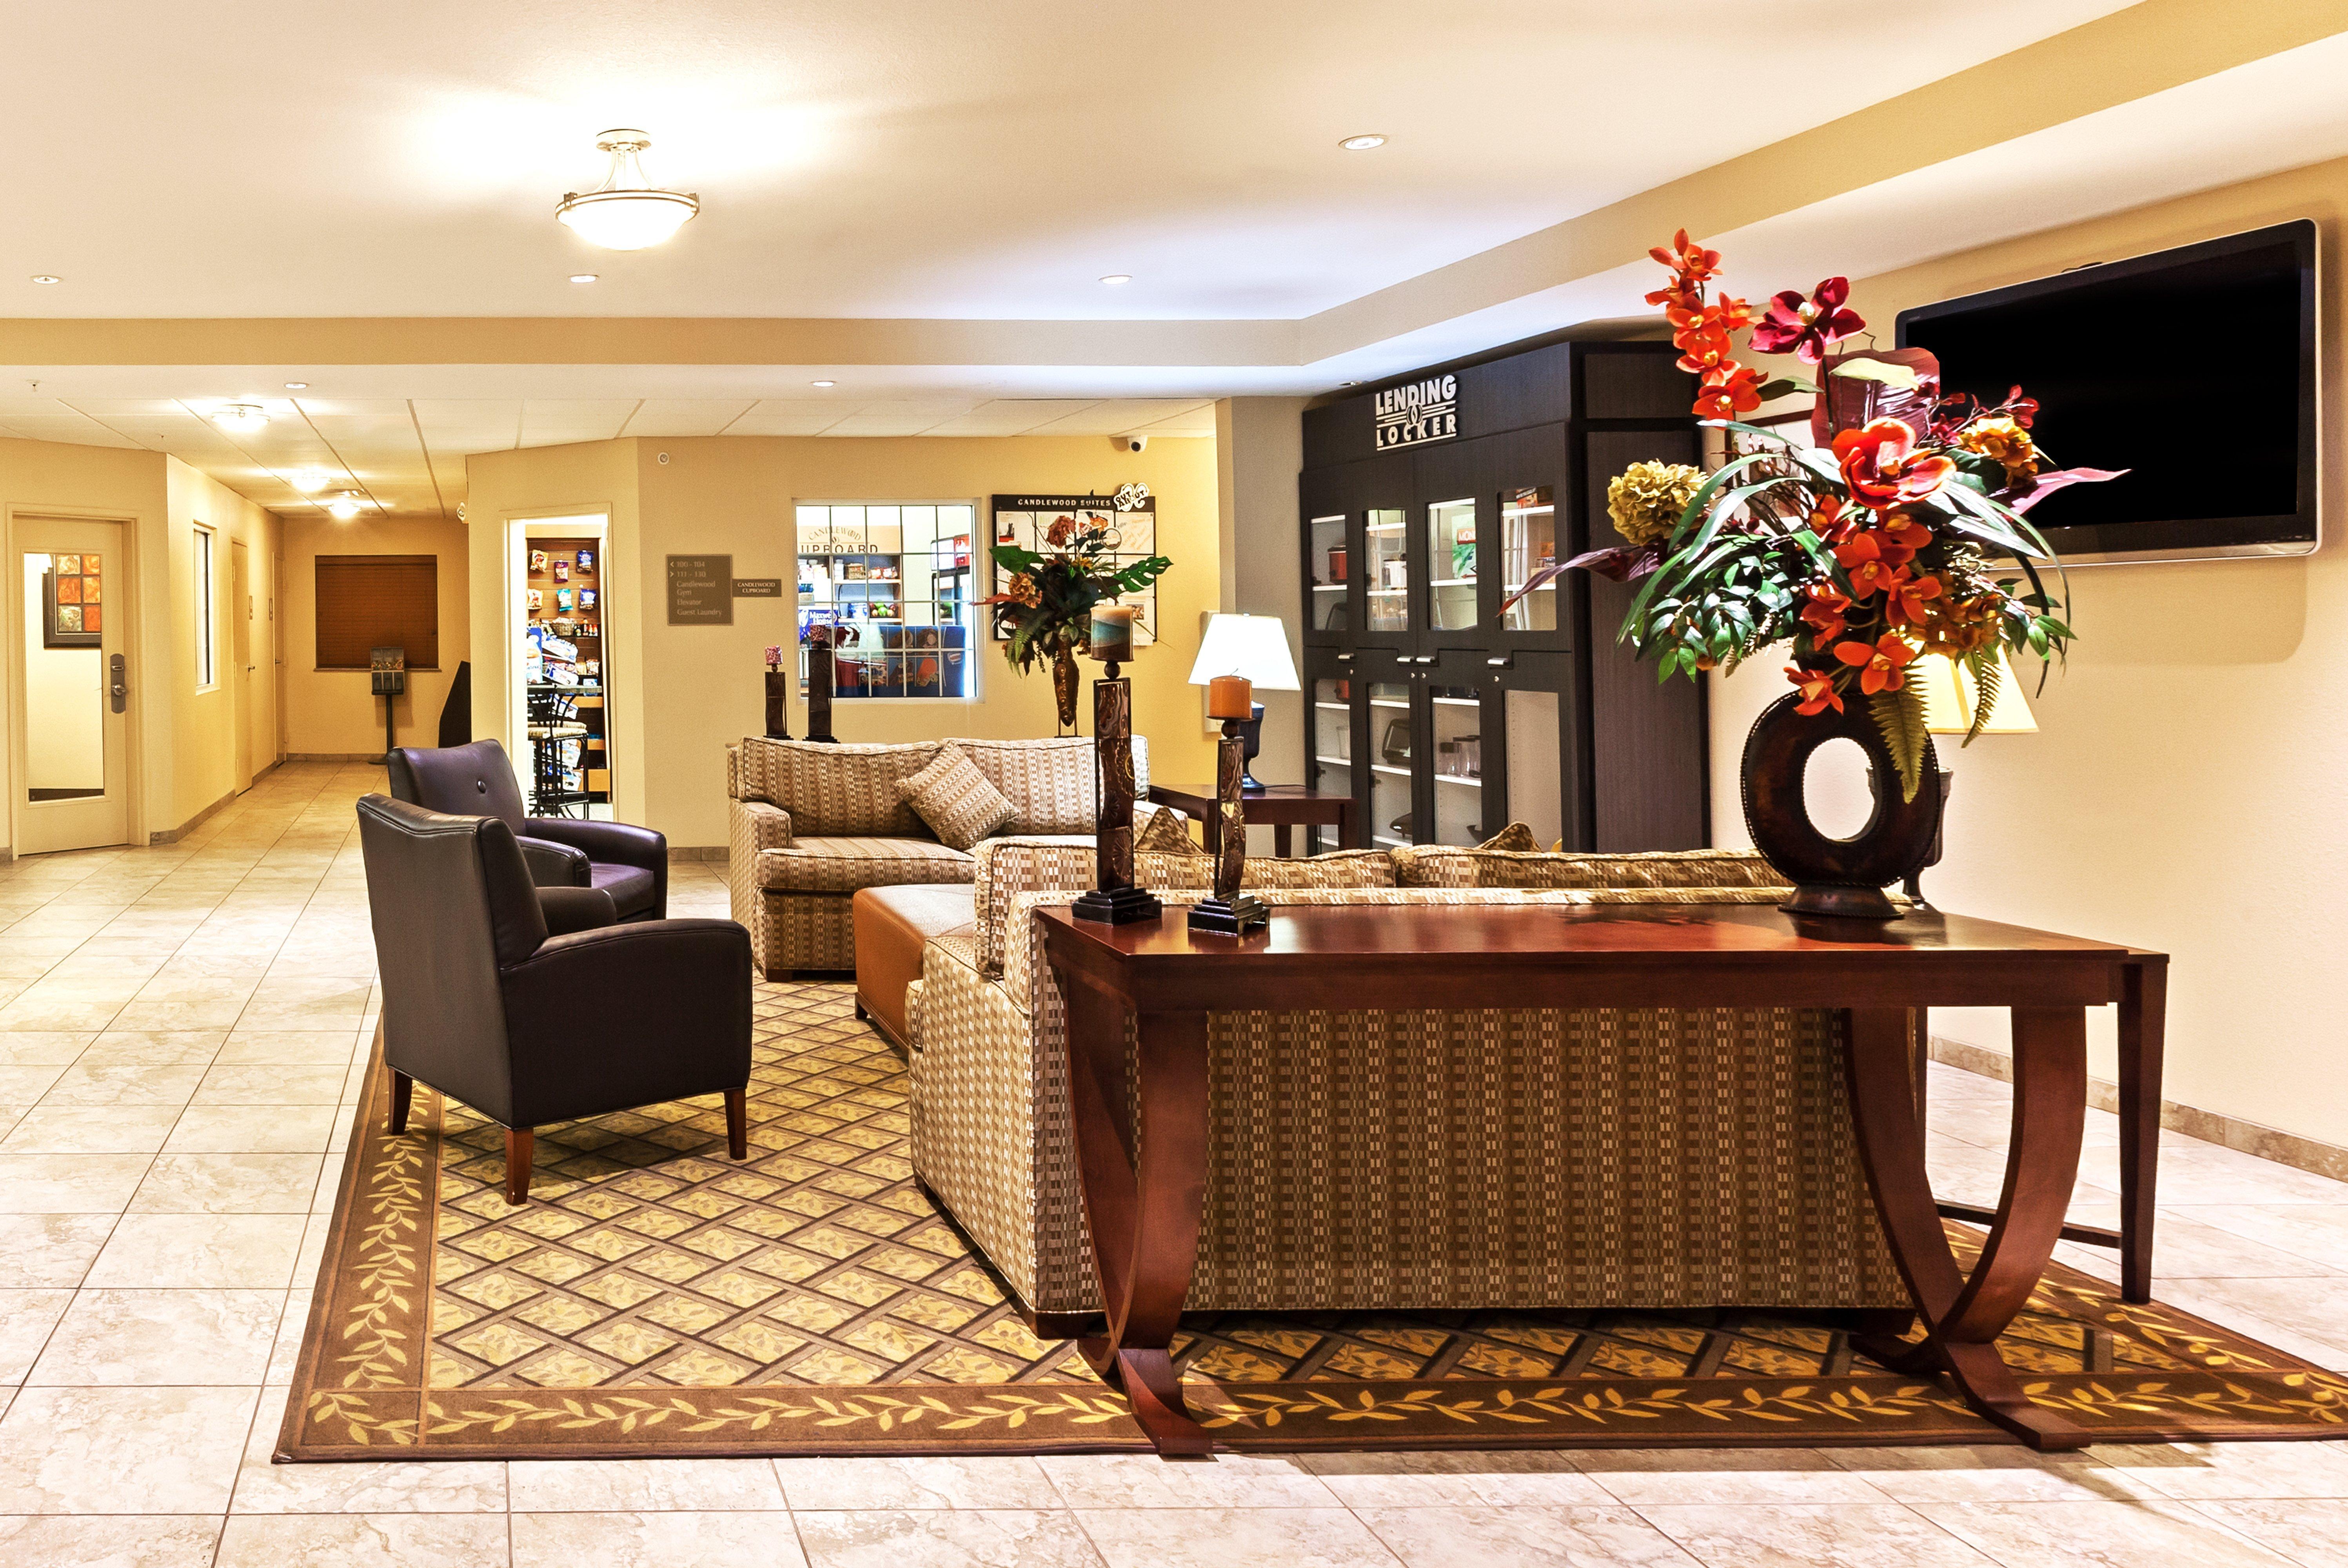 Candlewood Suites Pearland, An Ihg Hotel Bagian luar foto